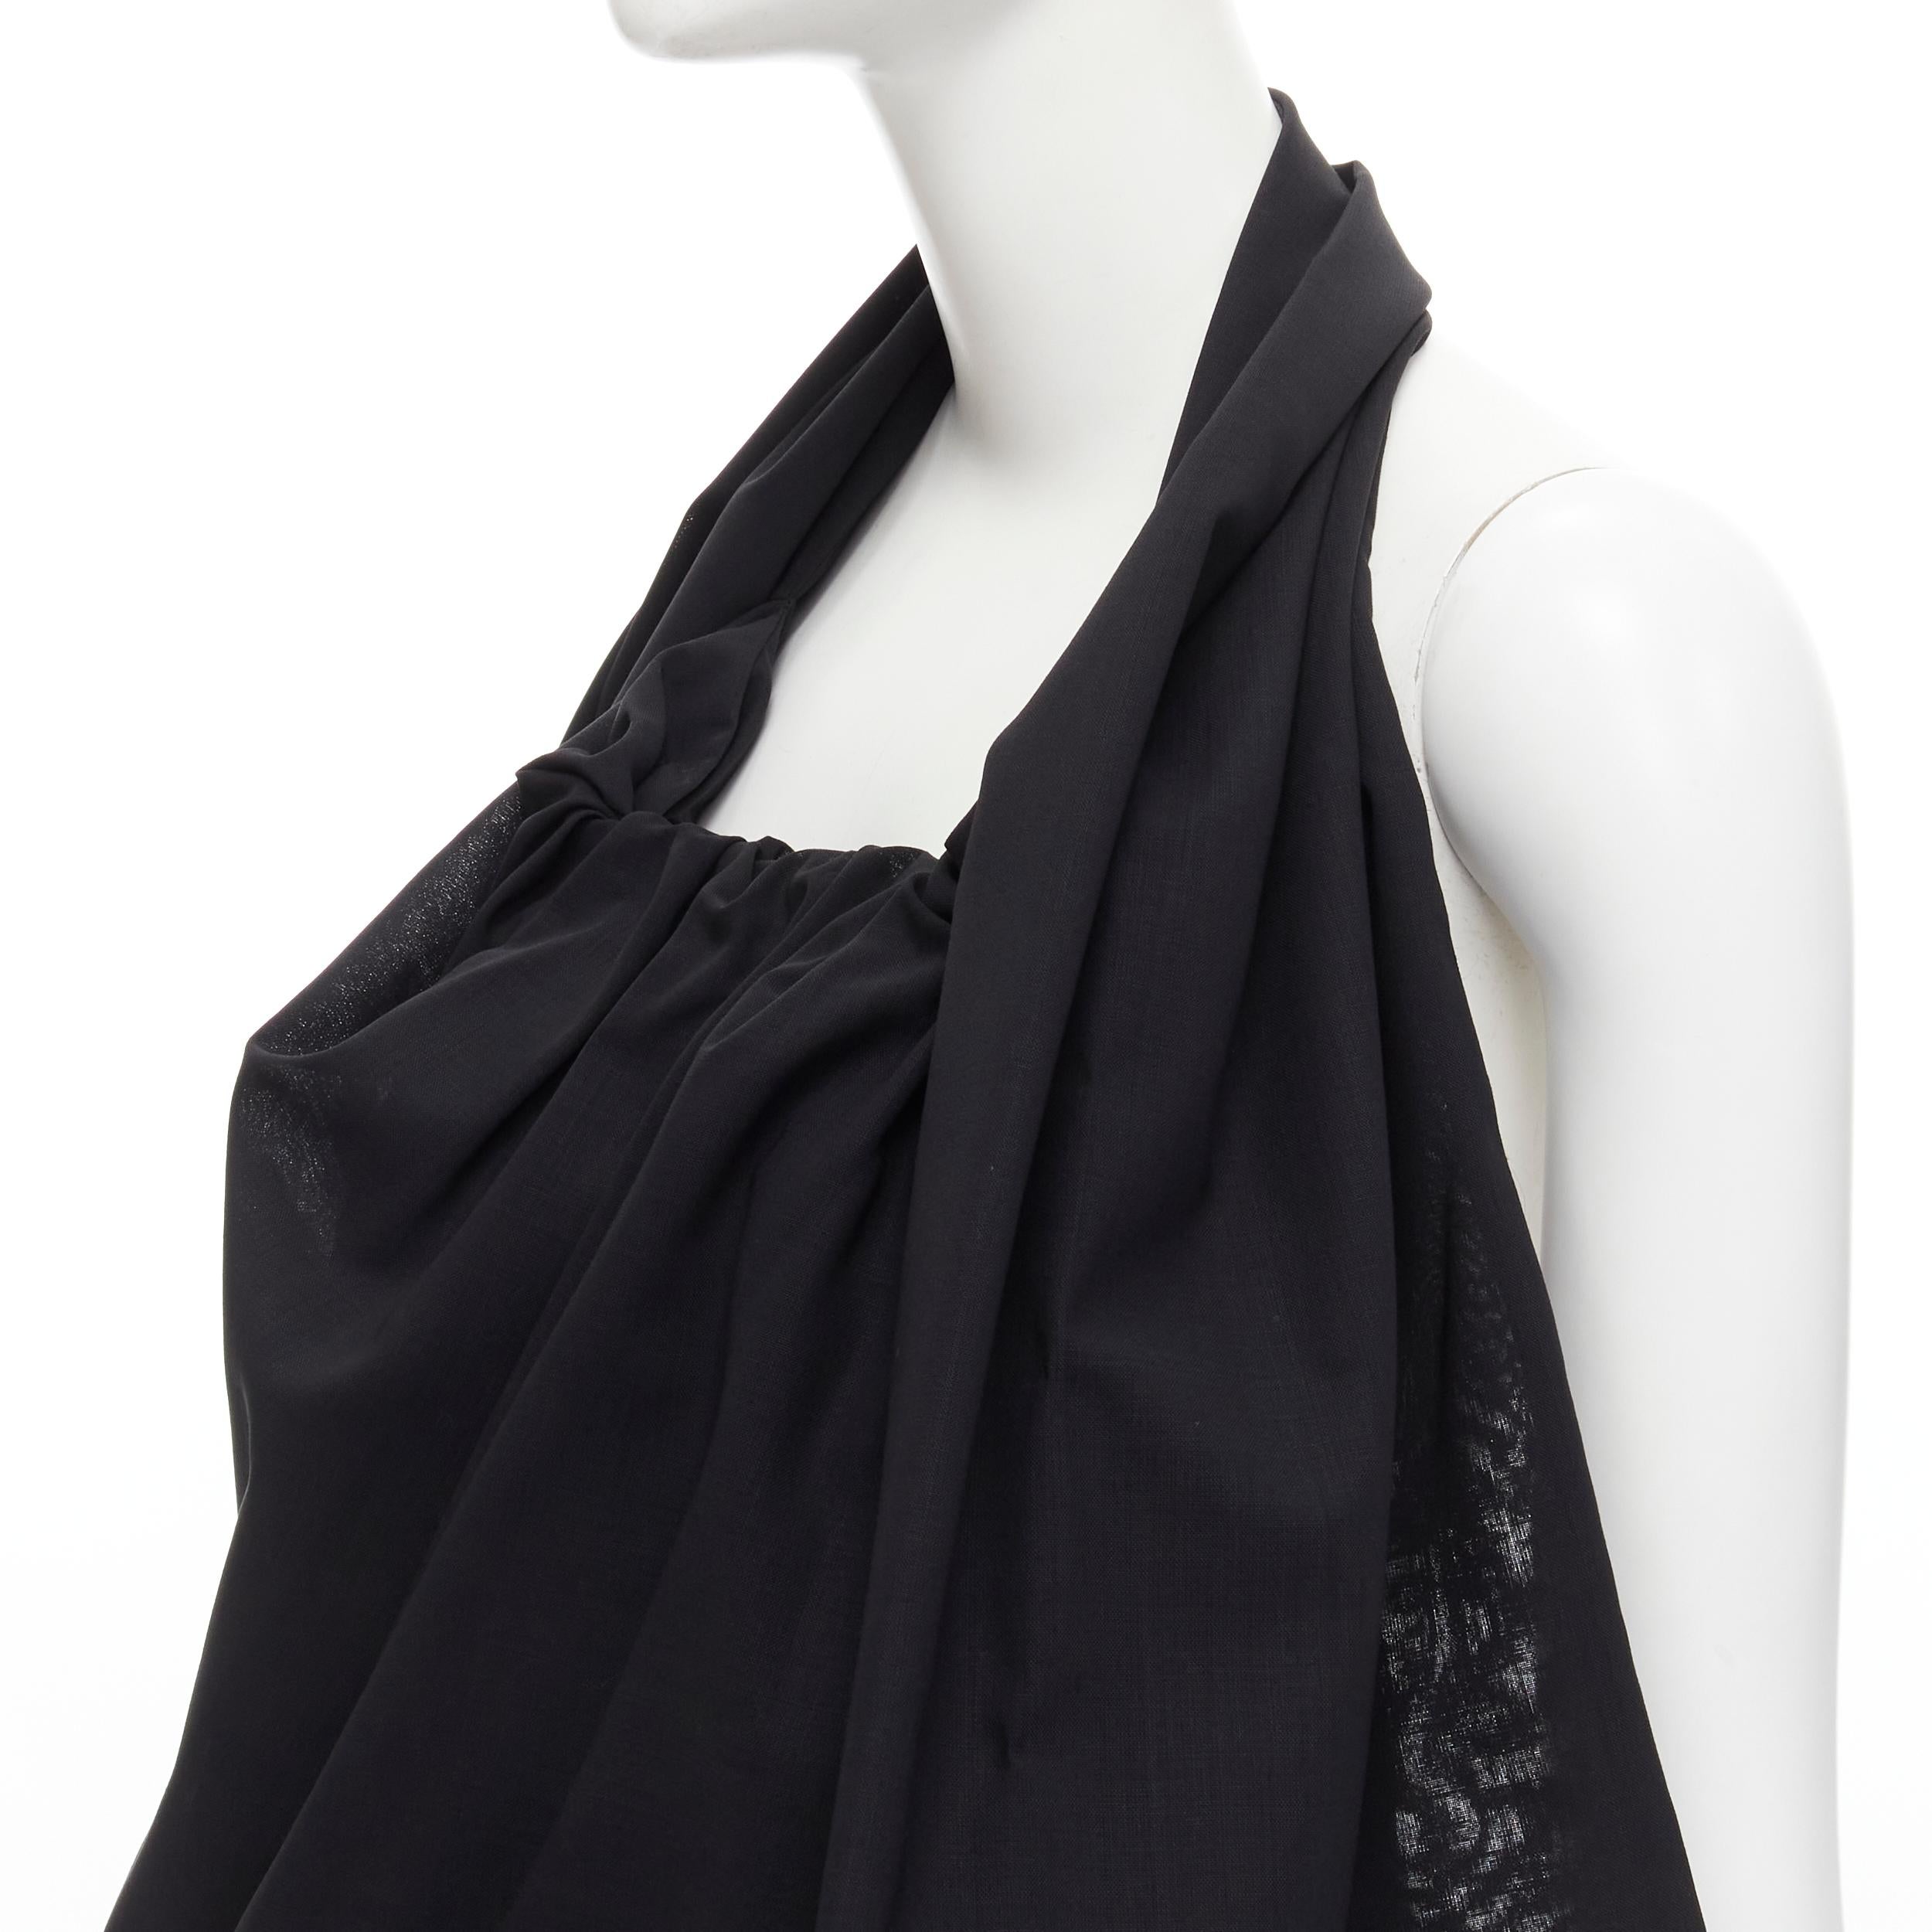 YOHJI YAMAMOTO 2012 Runway metal ring halter top transformable bag Very Rare 
Reference: CRTI/A00586 
Brand: Yohji Yamamoto 
Collection: 2002 Runway 
Color: Black 
Pattern: Solid 
Extra Detail: This top can be worn as a halter top or transformed to